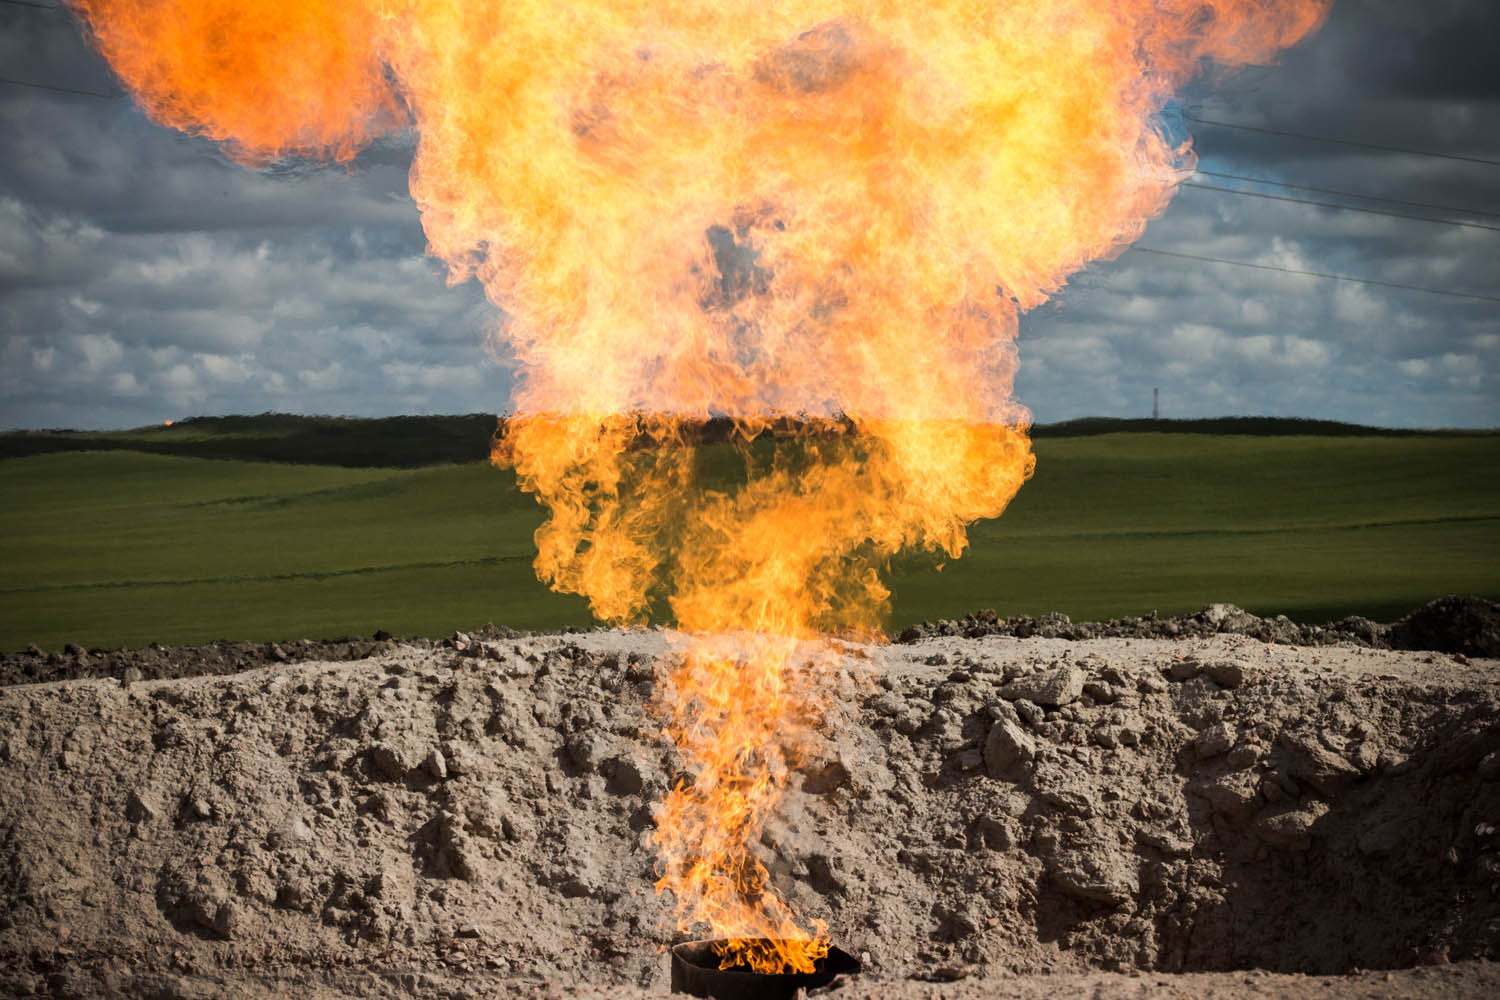 July 26, 2013. A gas flare is seen at an oil well site outside Williston, North Dakota.